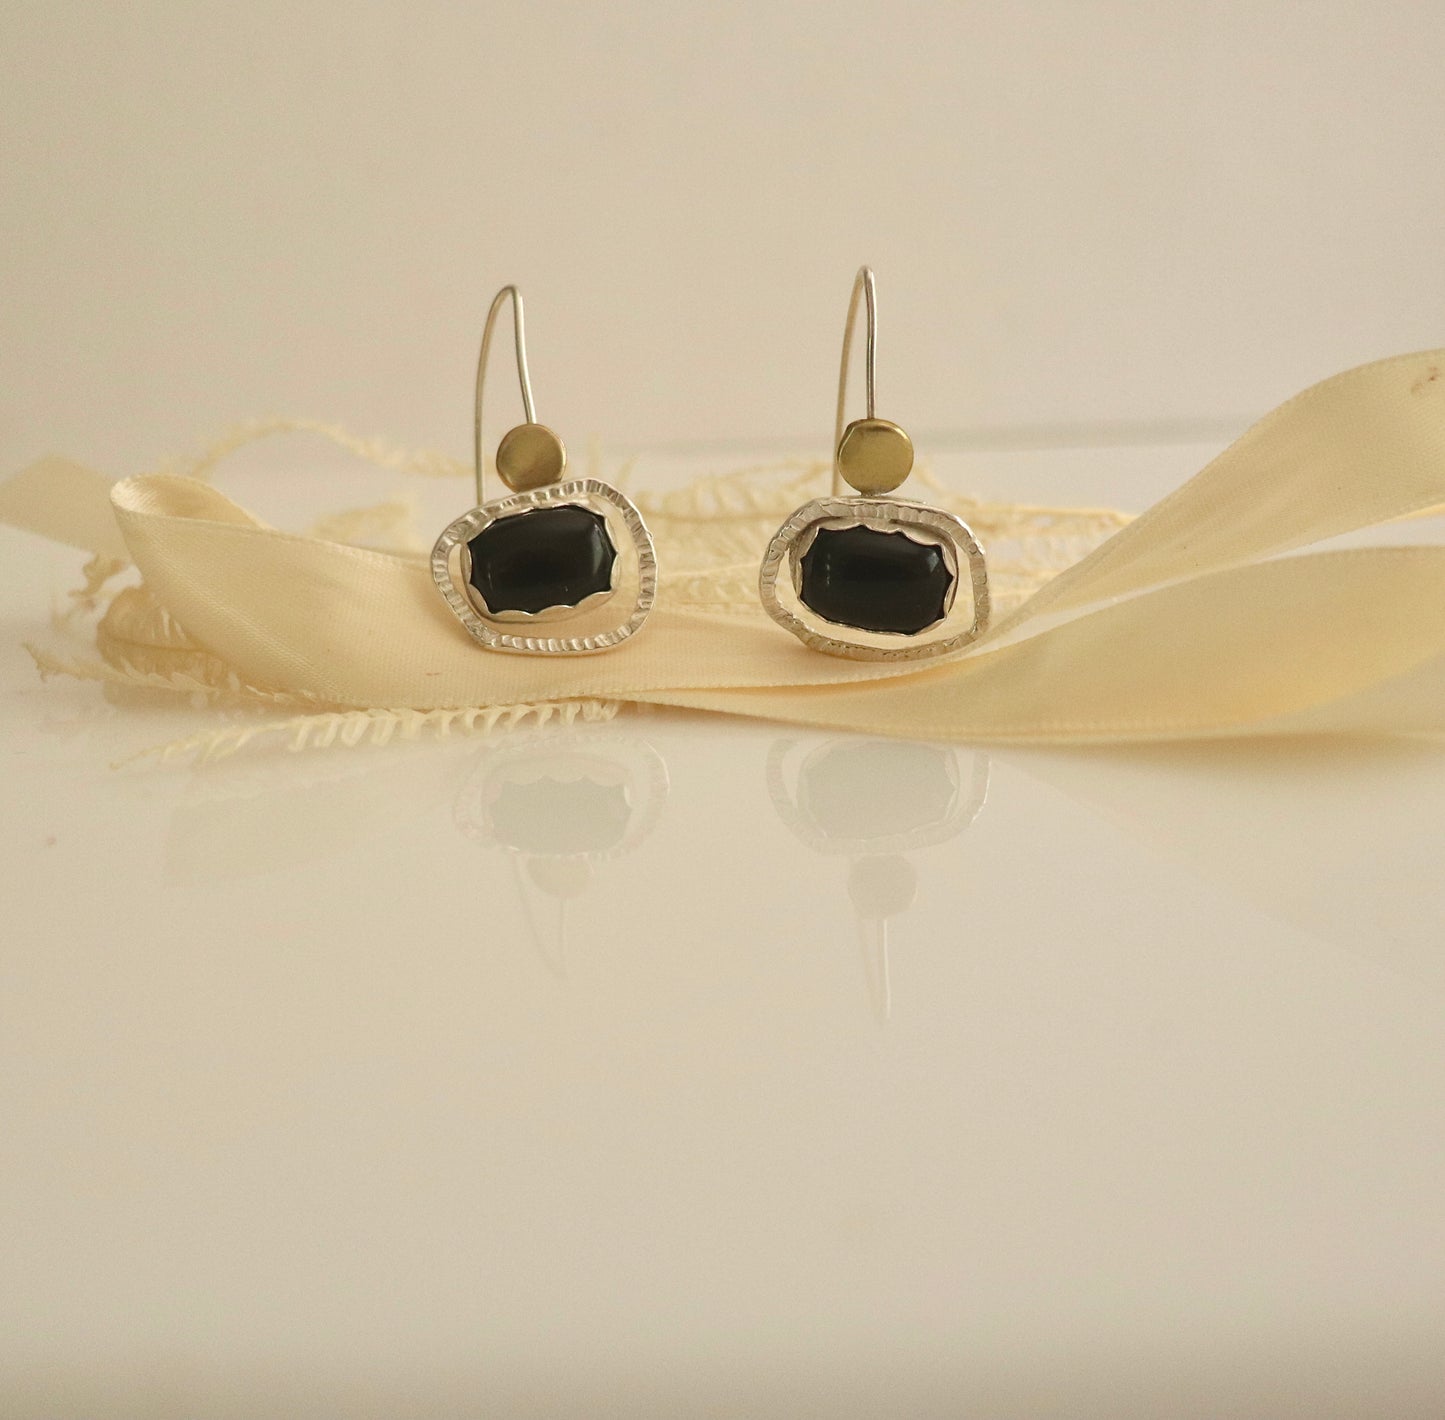 Brass and sterling silver black onyx earrings